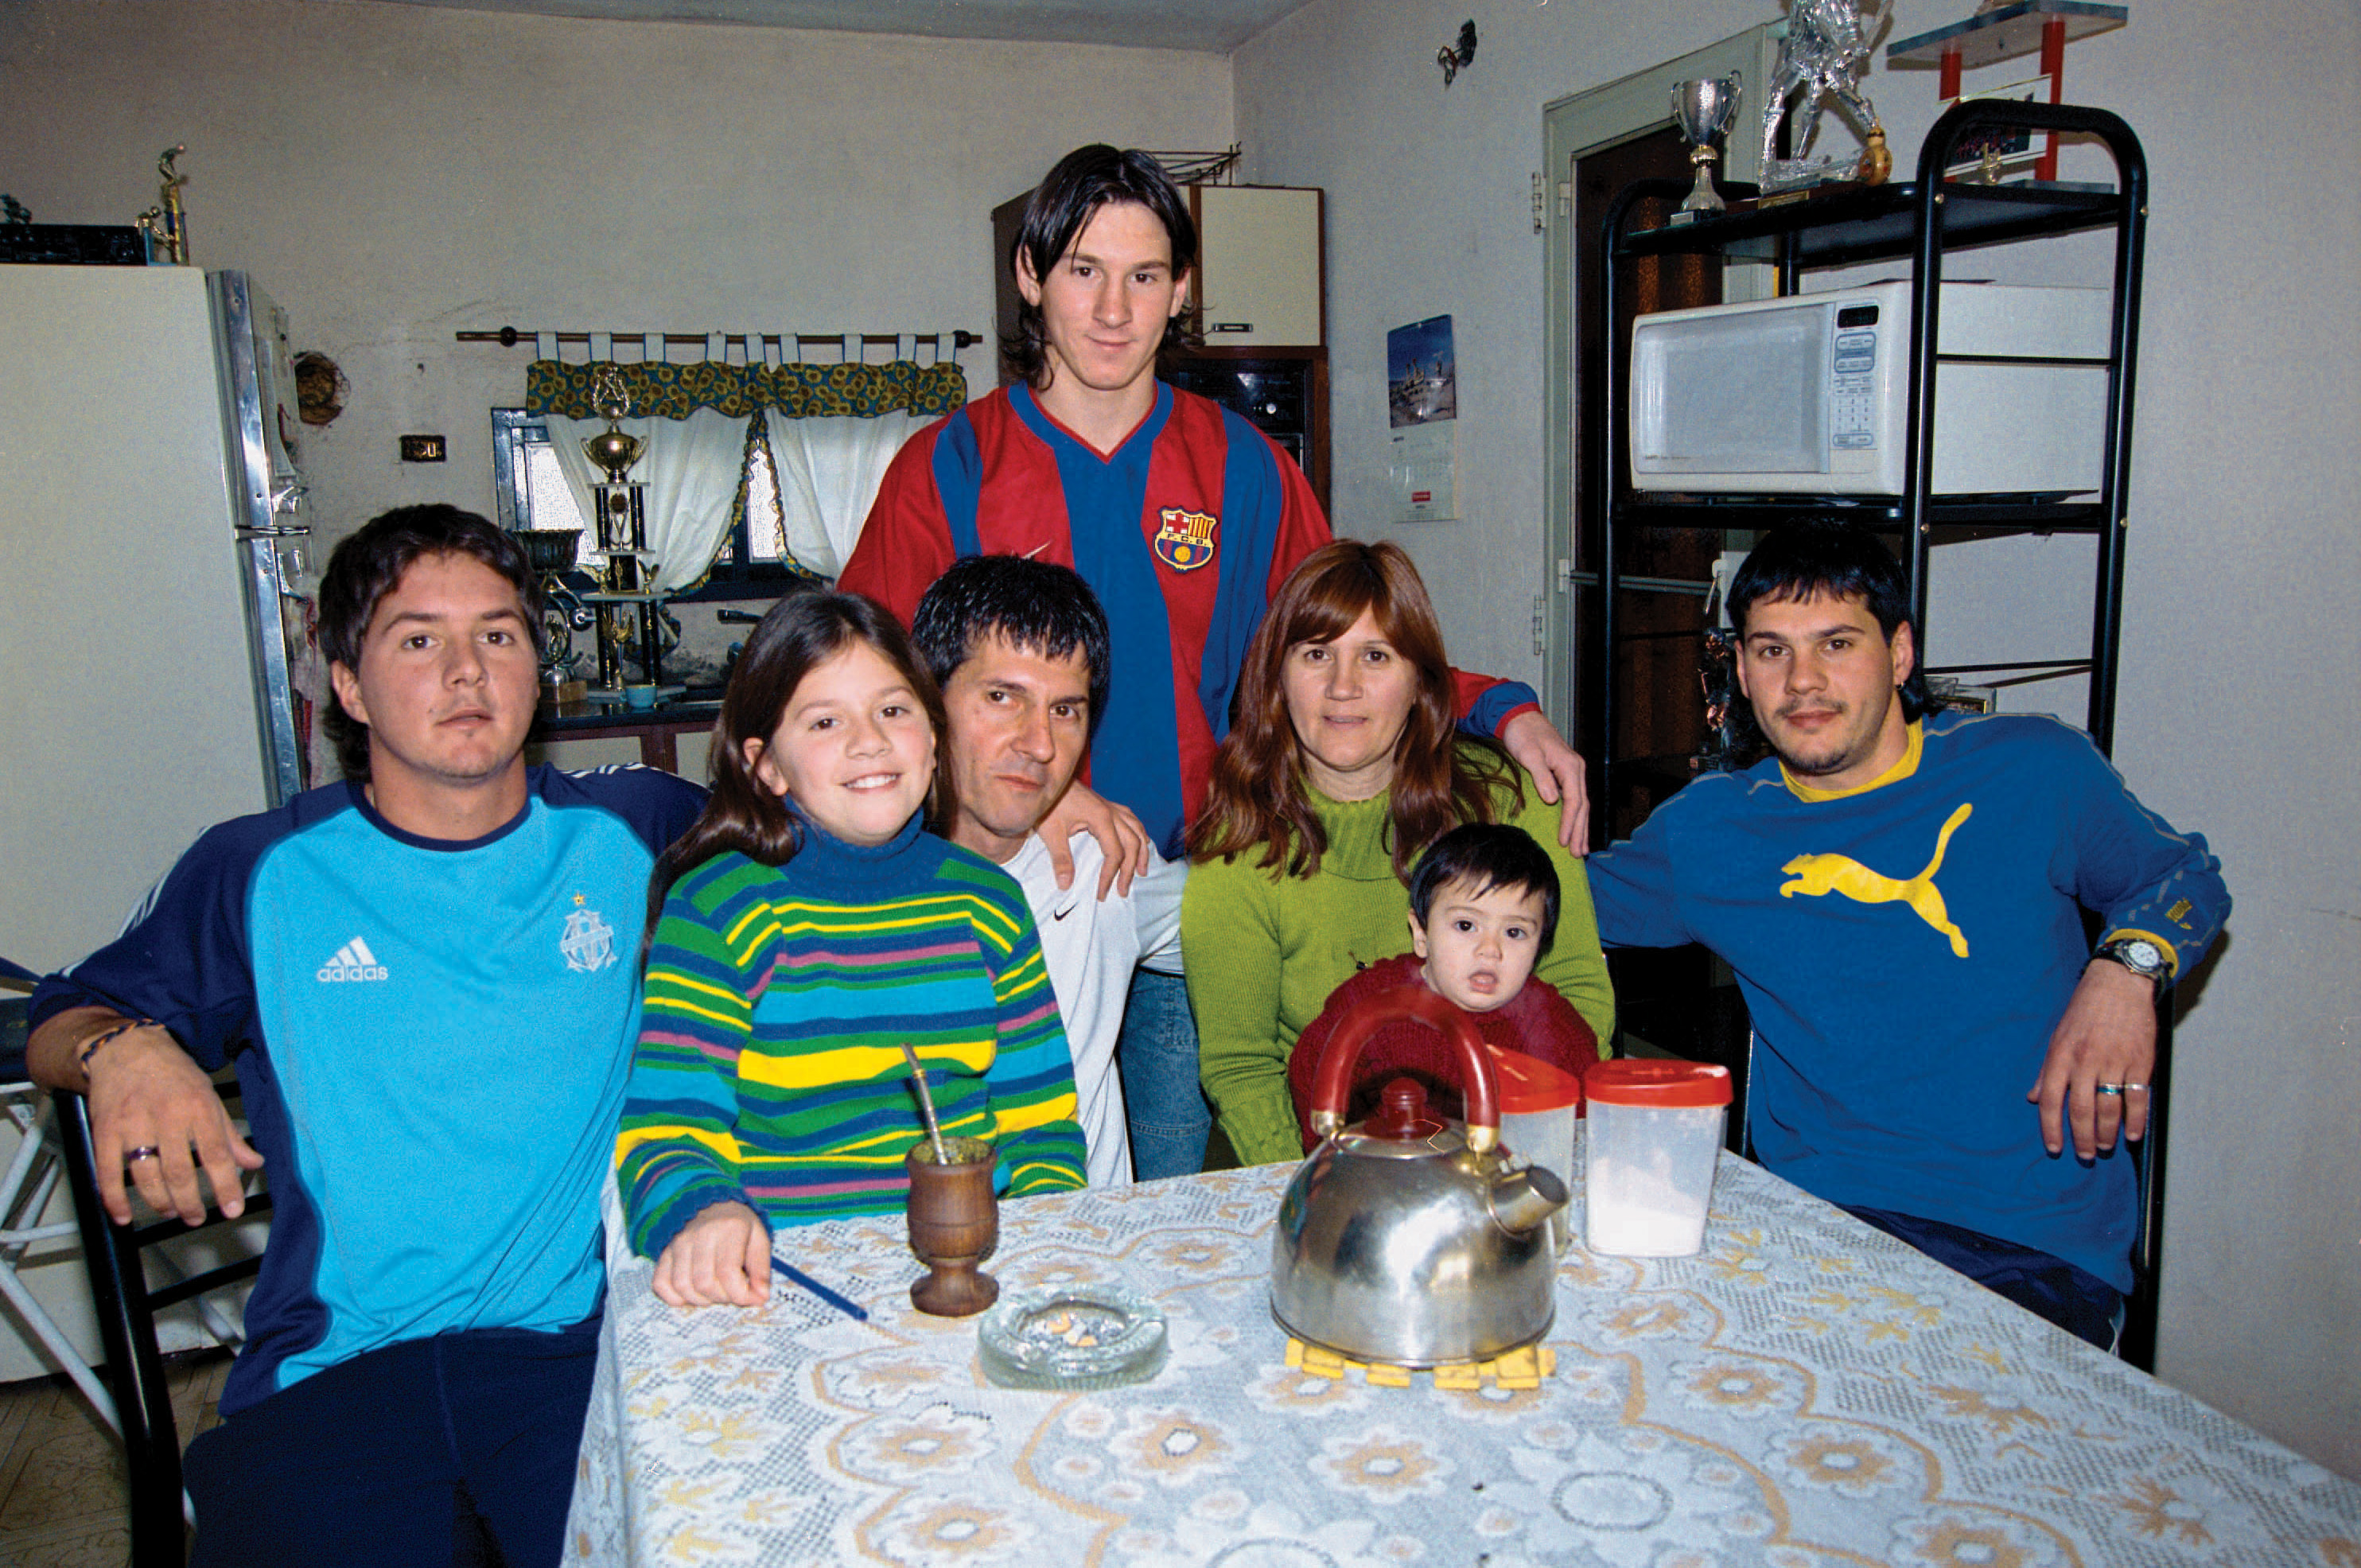 Lionel Messi with his brother Rodrigo, sister María Sol, father Jorge, mother Celia, nephew Tomás and brother Matías on October 12, 2003, in Rosario, Argentina. | Source: Getty Images